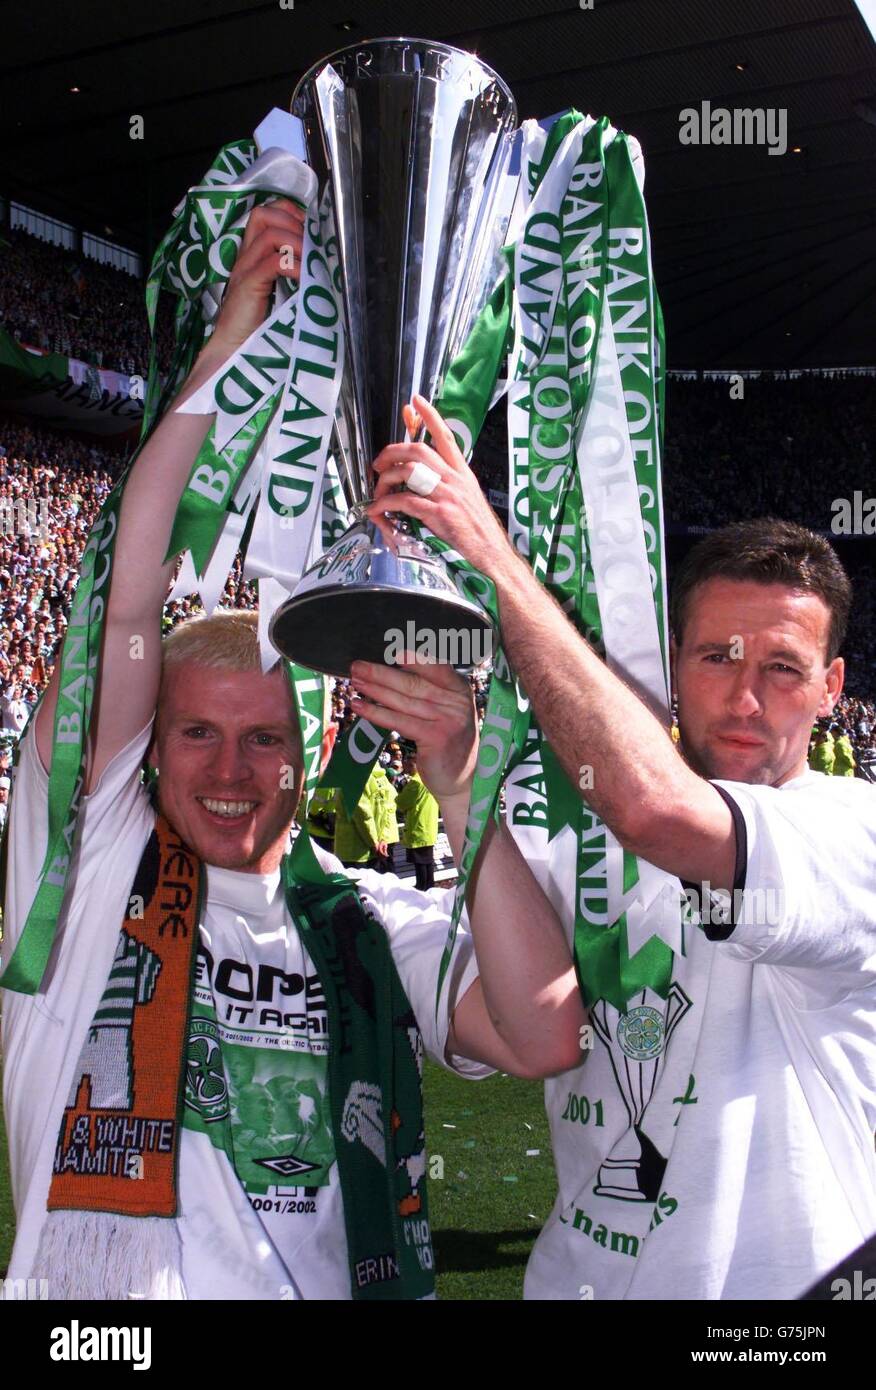 Celtic's Neil Lennon (left) and captain Paul Lambert (right) hold aloft the SPL trophy after their win over Livingstone, in their Bank of Scotland Scottish Premier League match at Celtic's Celtic Park stadium. Final Score: Celtic 5 Livingstone 1. *12/05/02 Celtic's Neil Lennon (left) and captain Paul Lambert (right) hold aloft the SPL trophy after their win over Livingstone, in their Bank of Scotland Scottish Premier League match at Celtic's Celtic Park stadium. Final Score: Celtic 5 Livingstone 1. Celtic and Rangers will be invited to join the English Nationwide League next season, it was Stock Photo